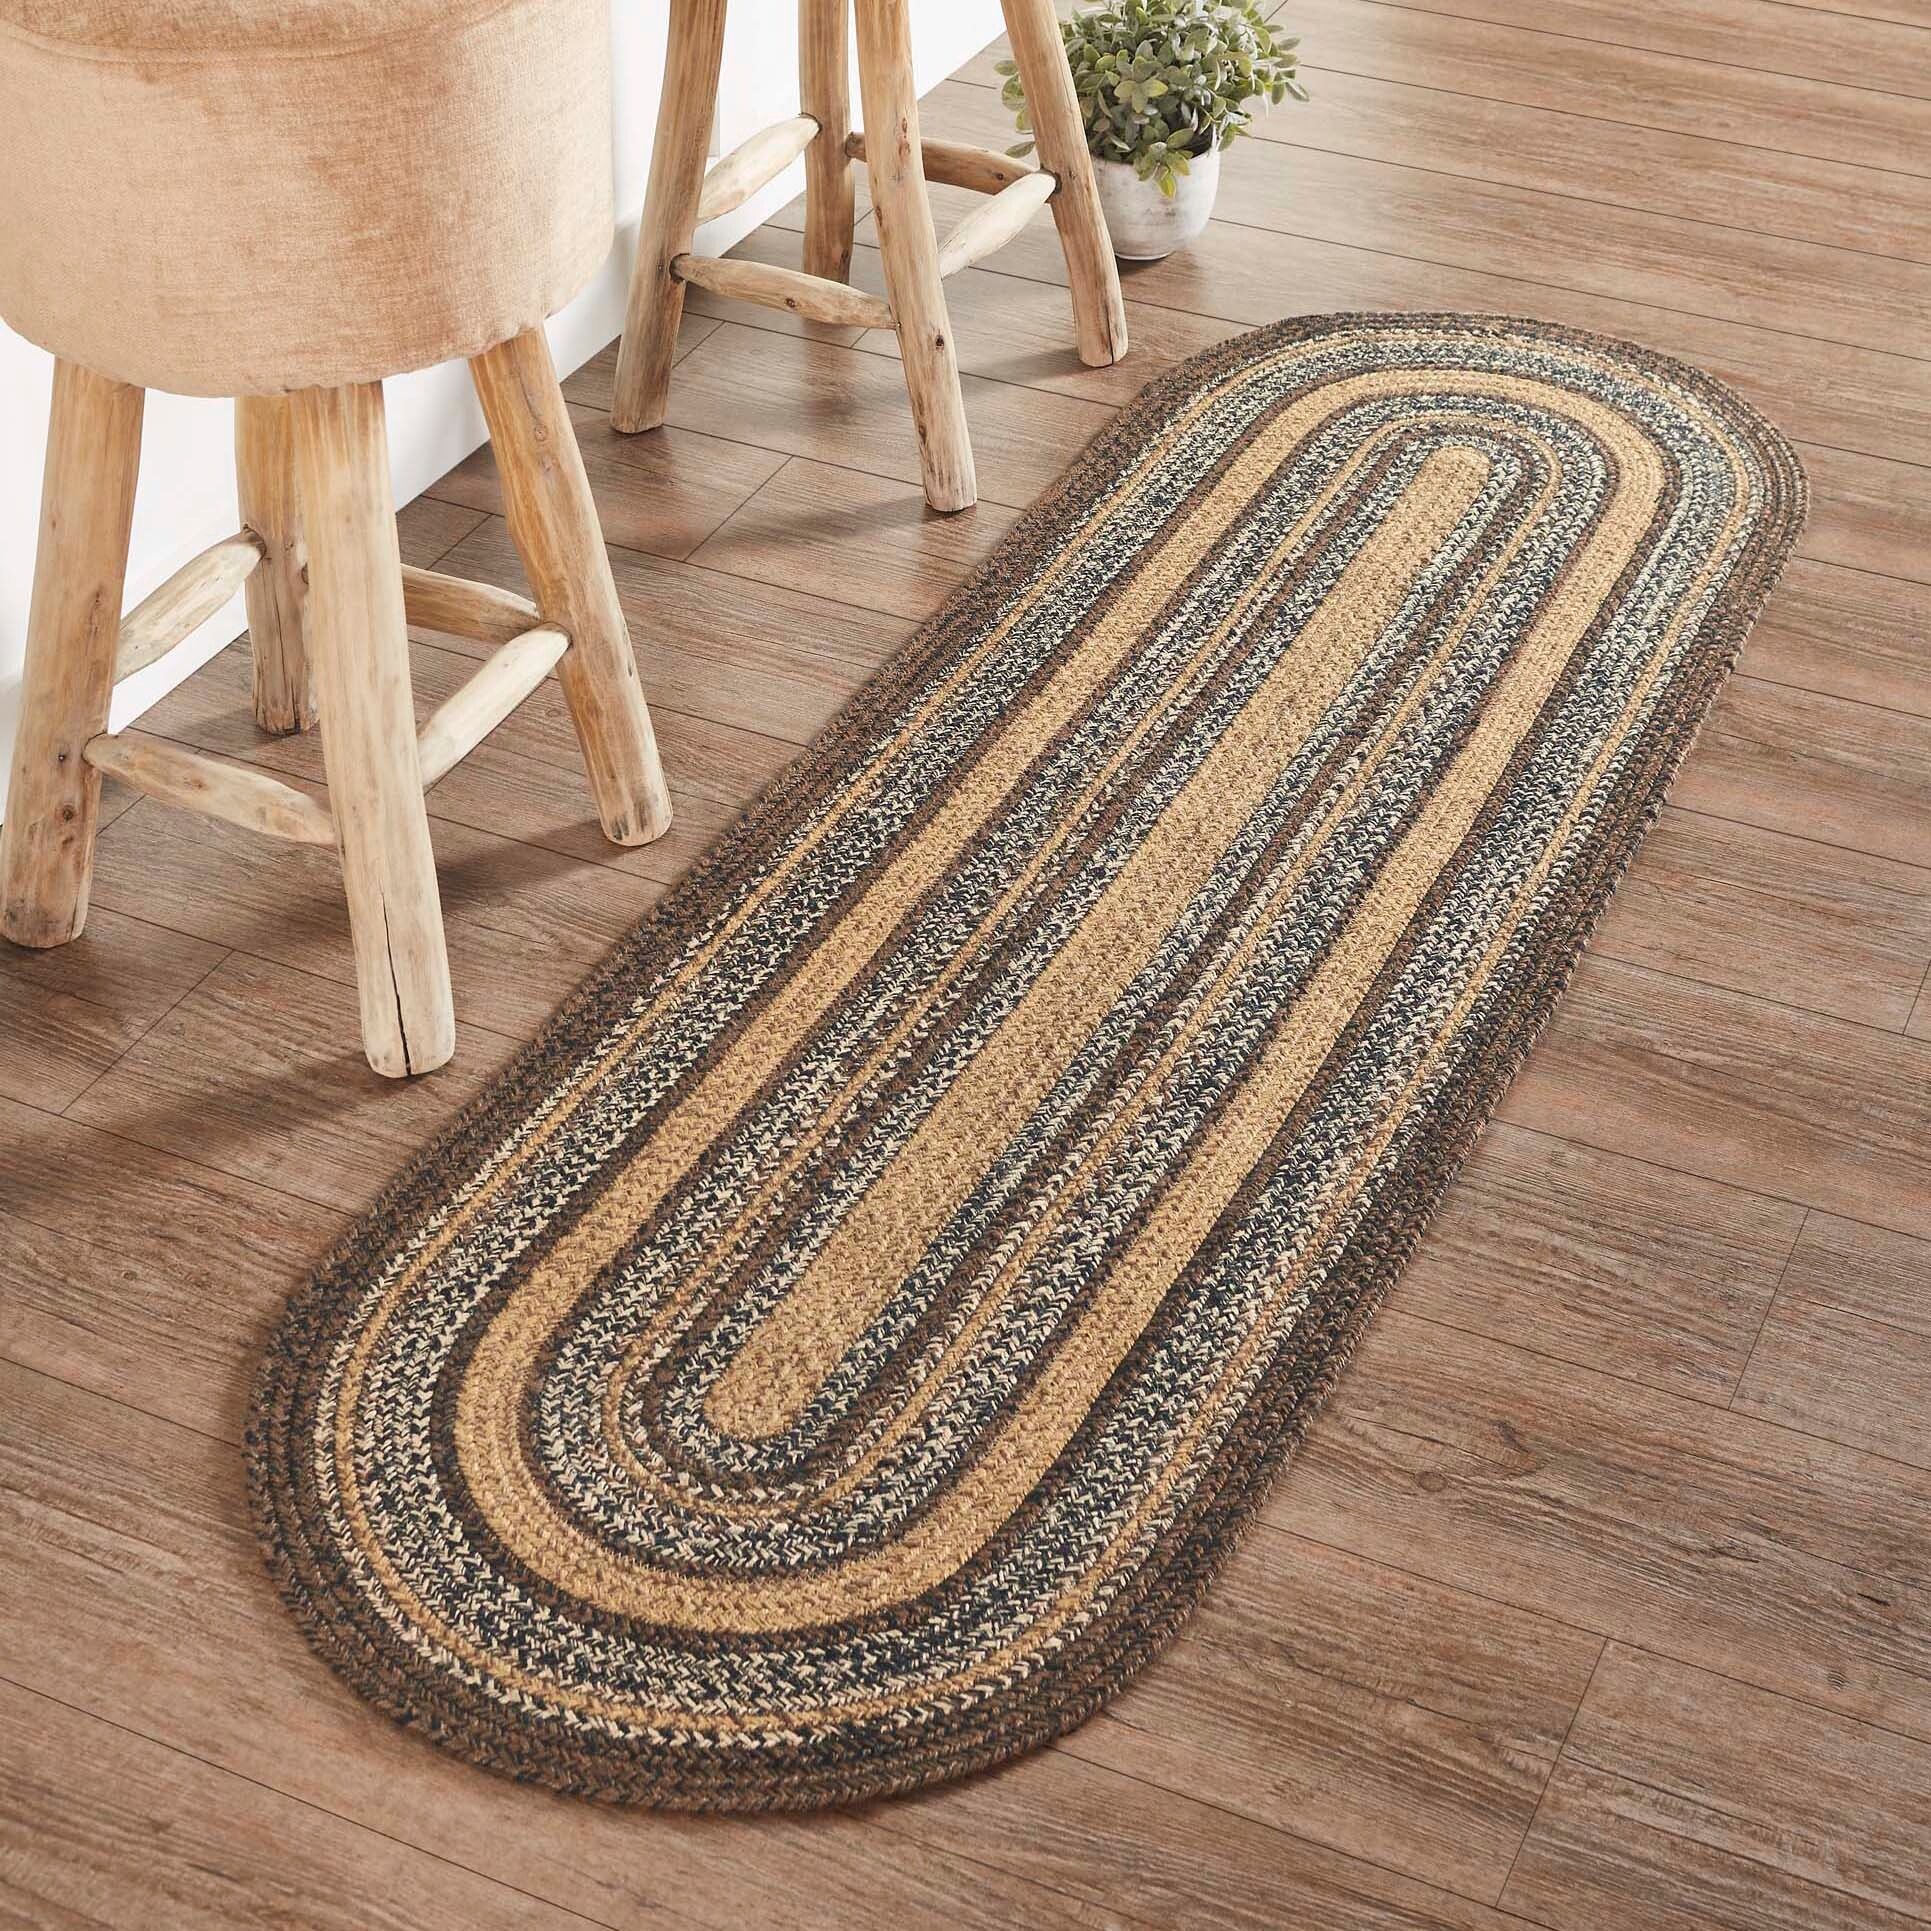 Country VHC Brands Area Rugs - Bed Bath & Beyond